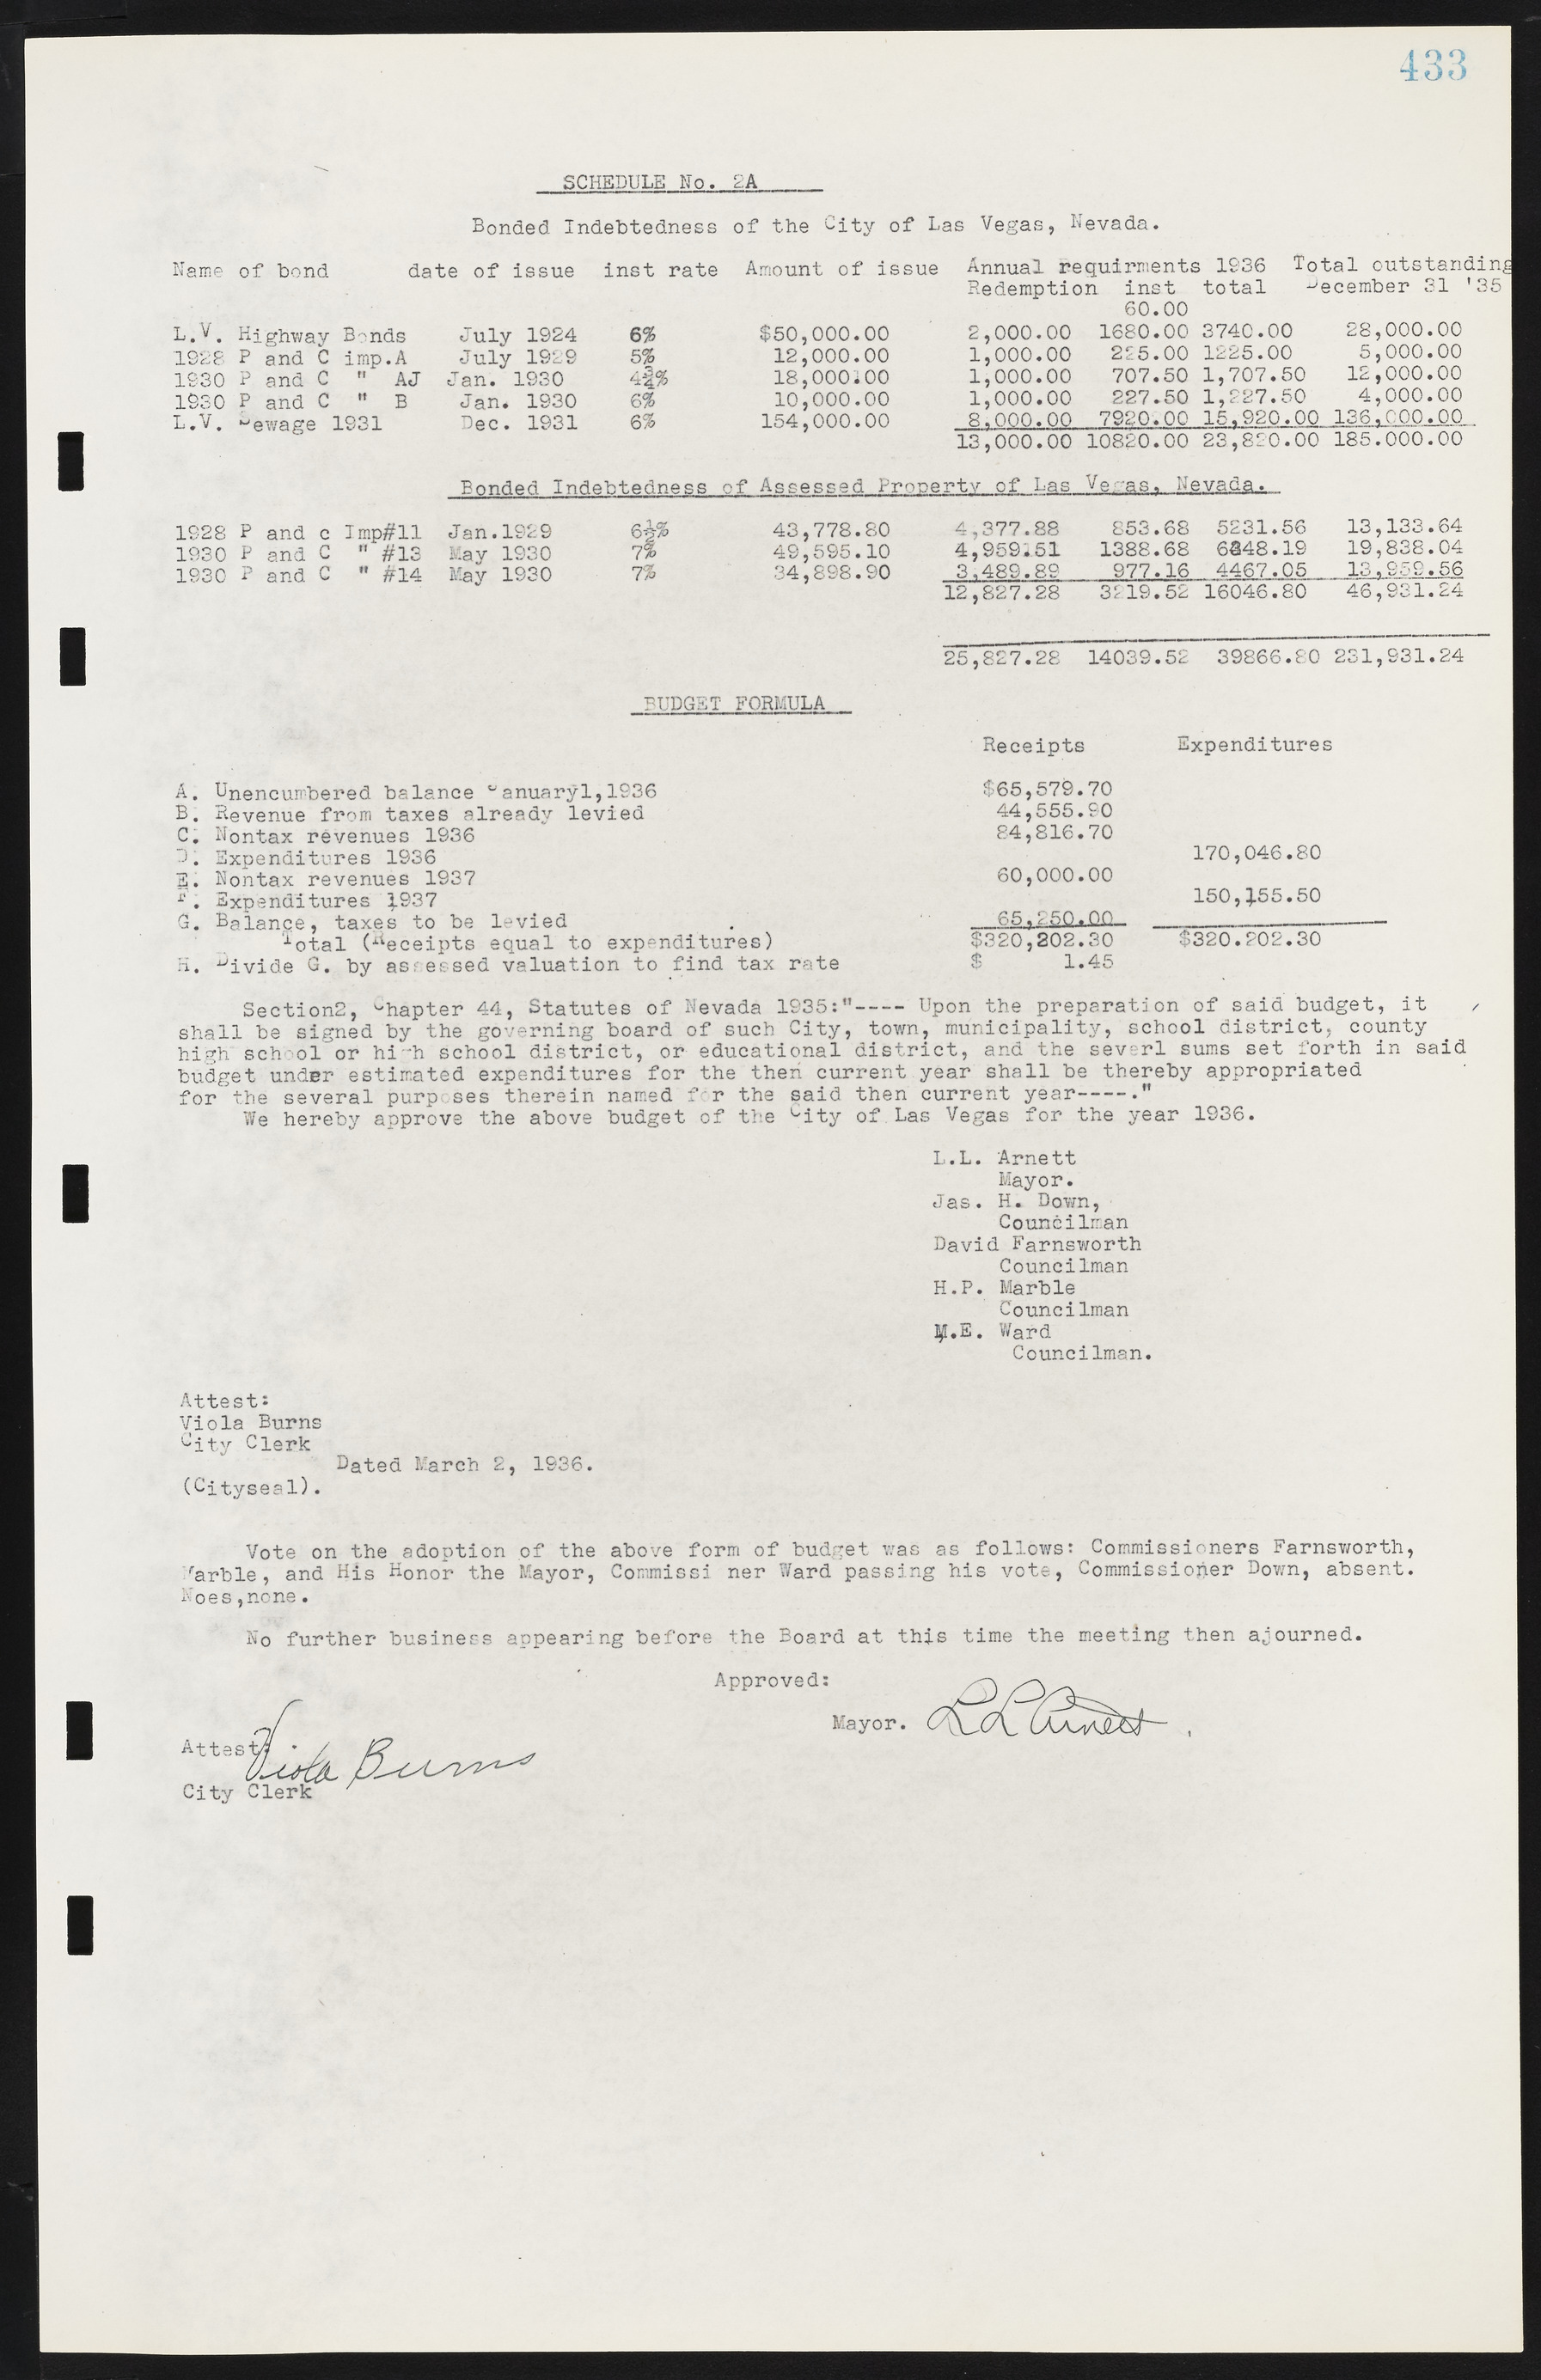 Las Vegas City Commission Minutes, May 14, 1929 to February 11, 1937, lvc000003-440